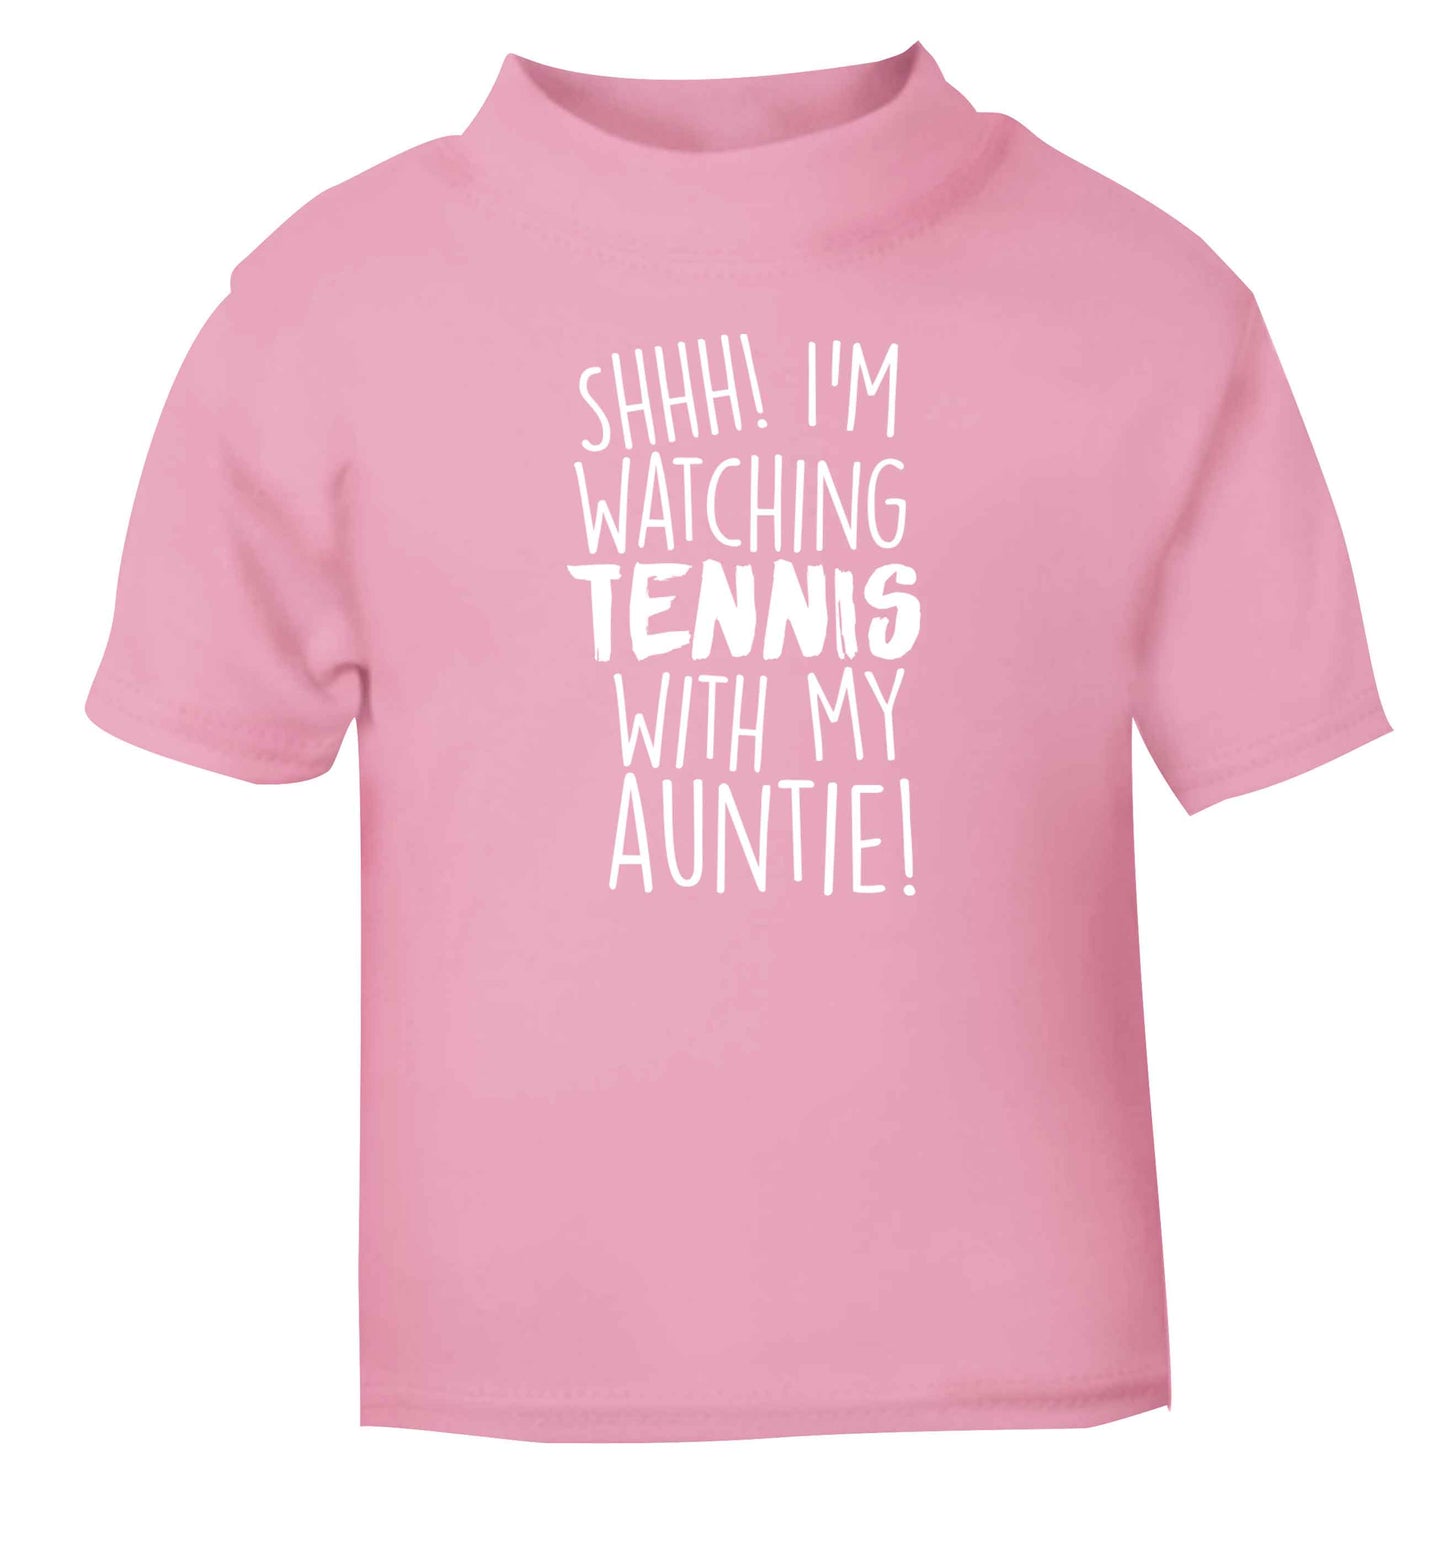 Shh! I'm watching tennis with my auntie! light pink Baby Toddler Tshirt 2 Years